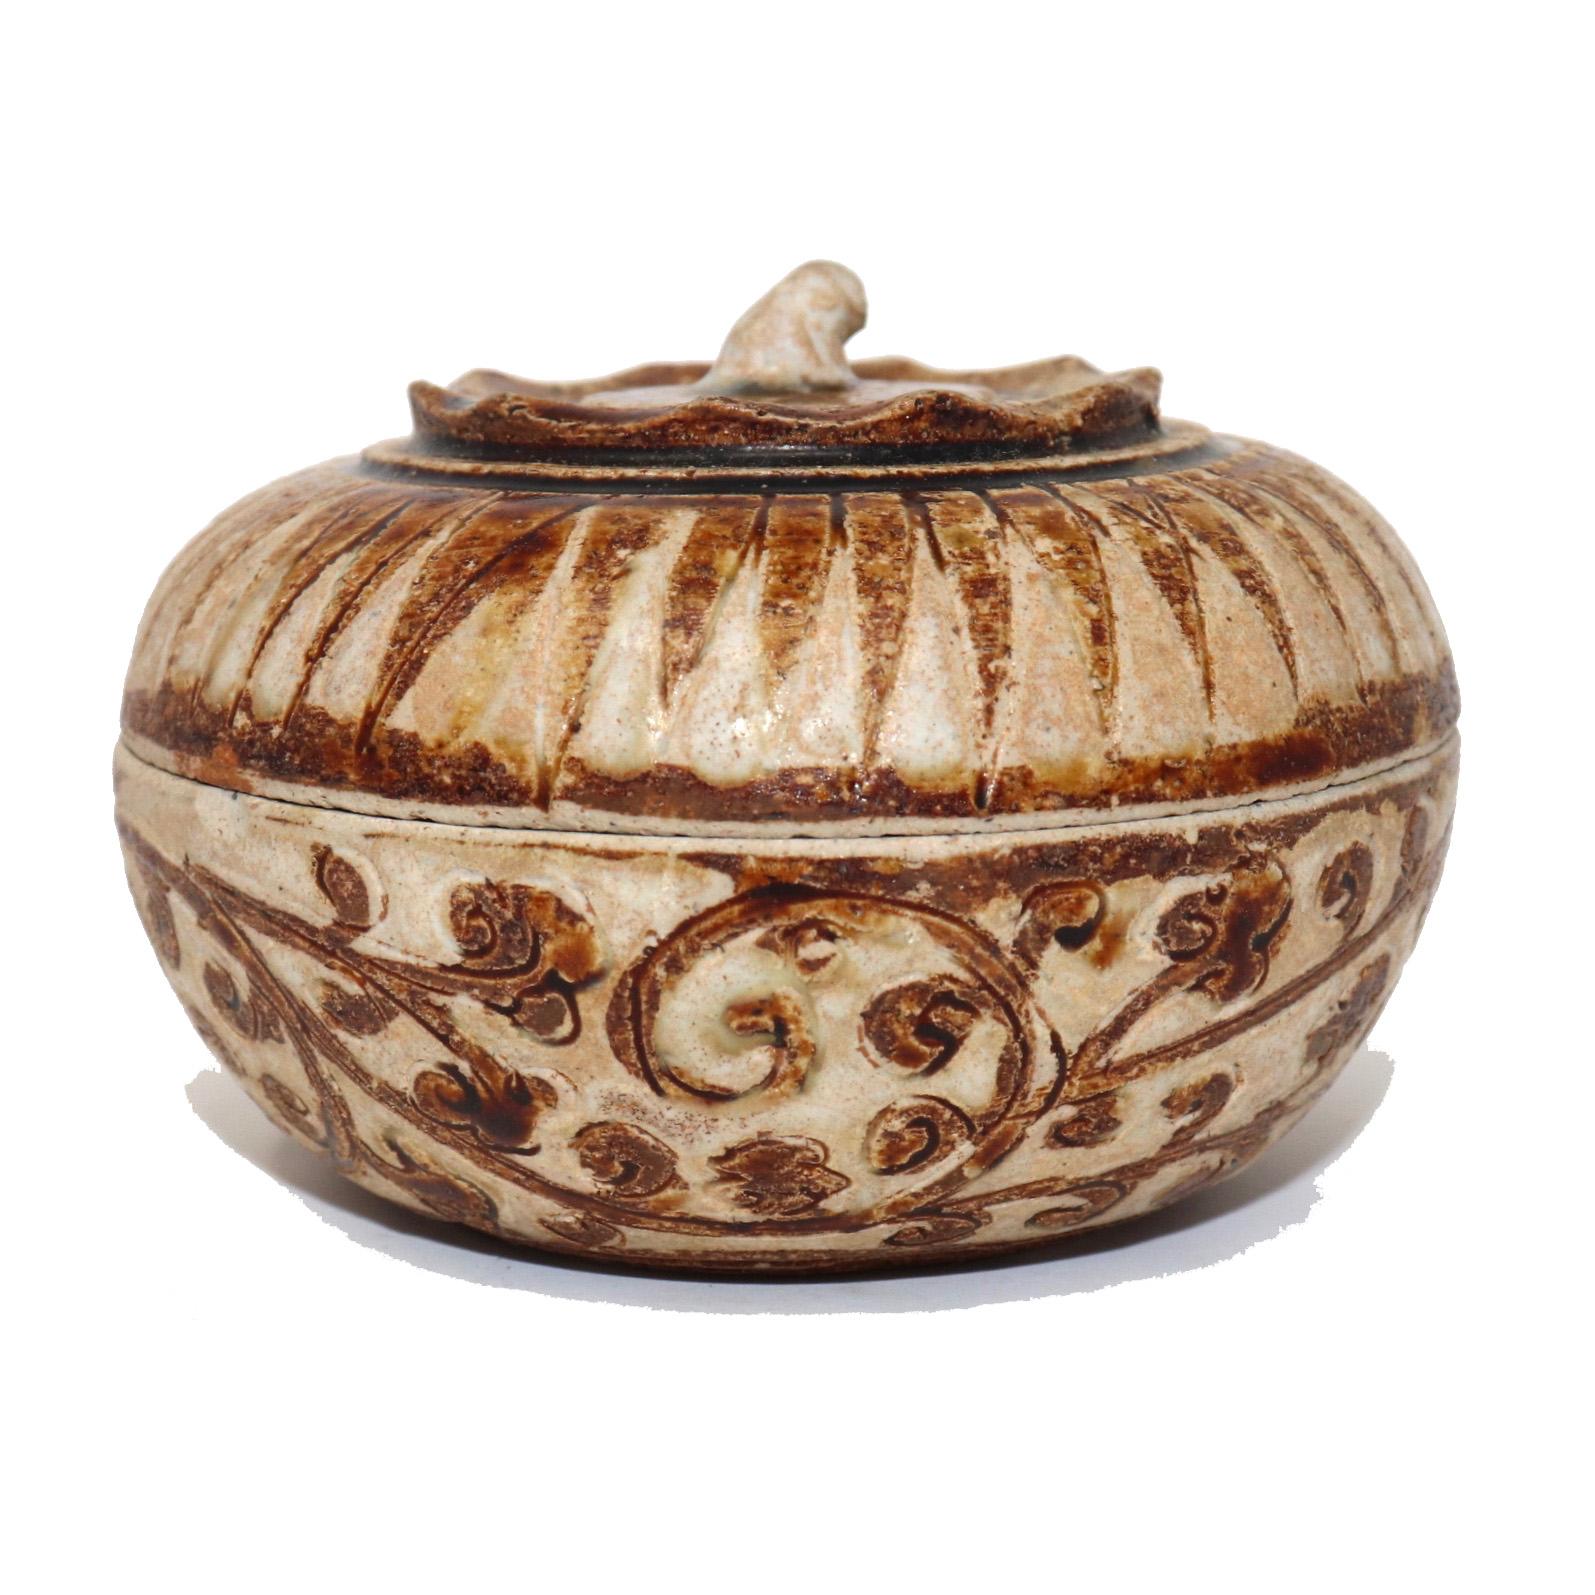 Antique ceramic covered box from the Sawankhalok kilns, Thailand of squat globular persimmon form with pinched sepal ridge and curled stem finial top decorated in a caramel brown and translucent white glaze on the stoneware biscuit in a saw tooth